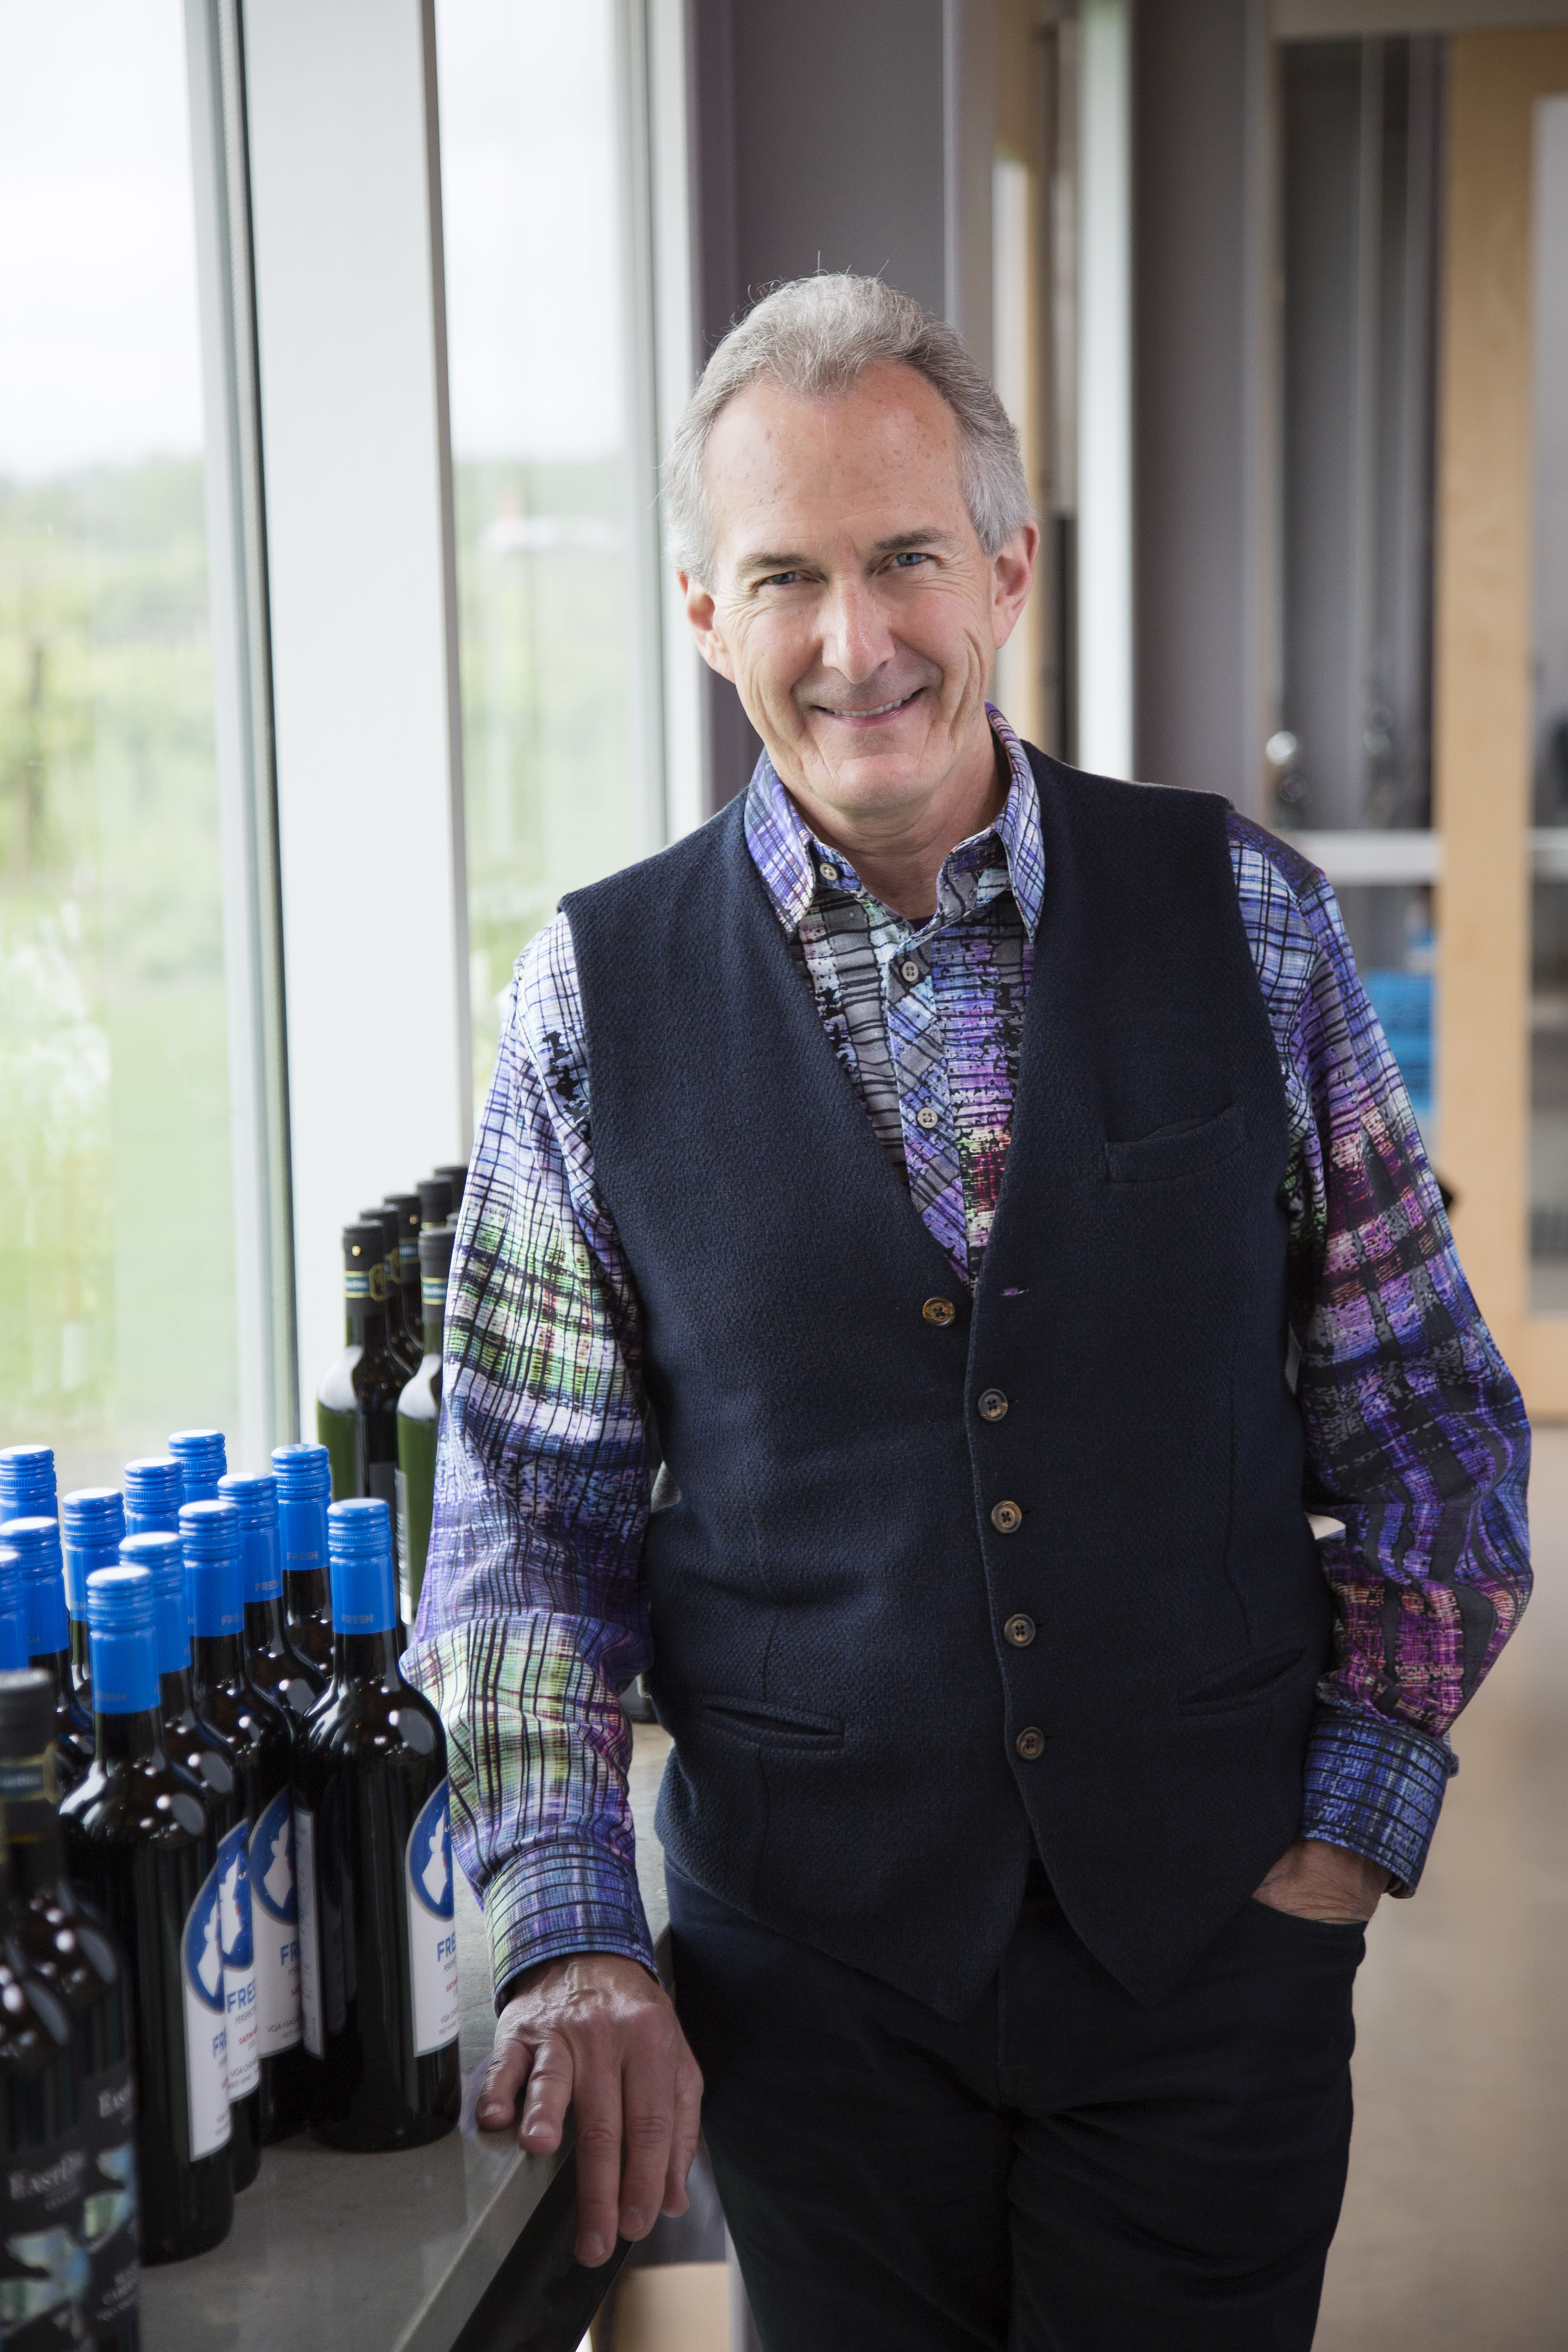 Lakeview Wine Co. Management Tim McChesney